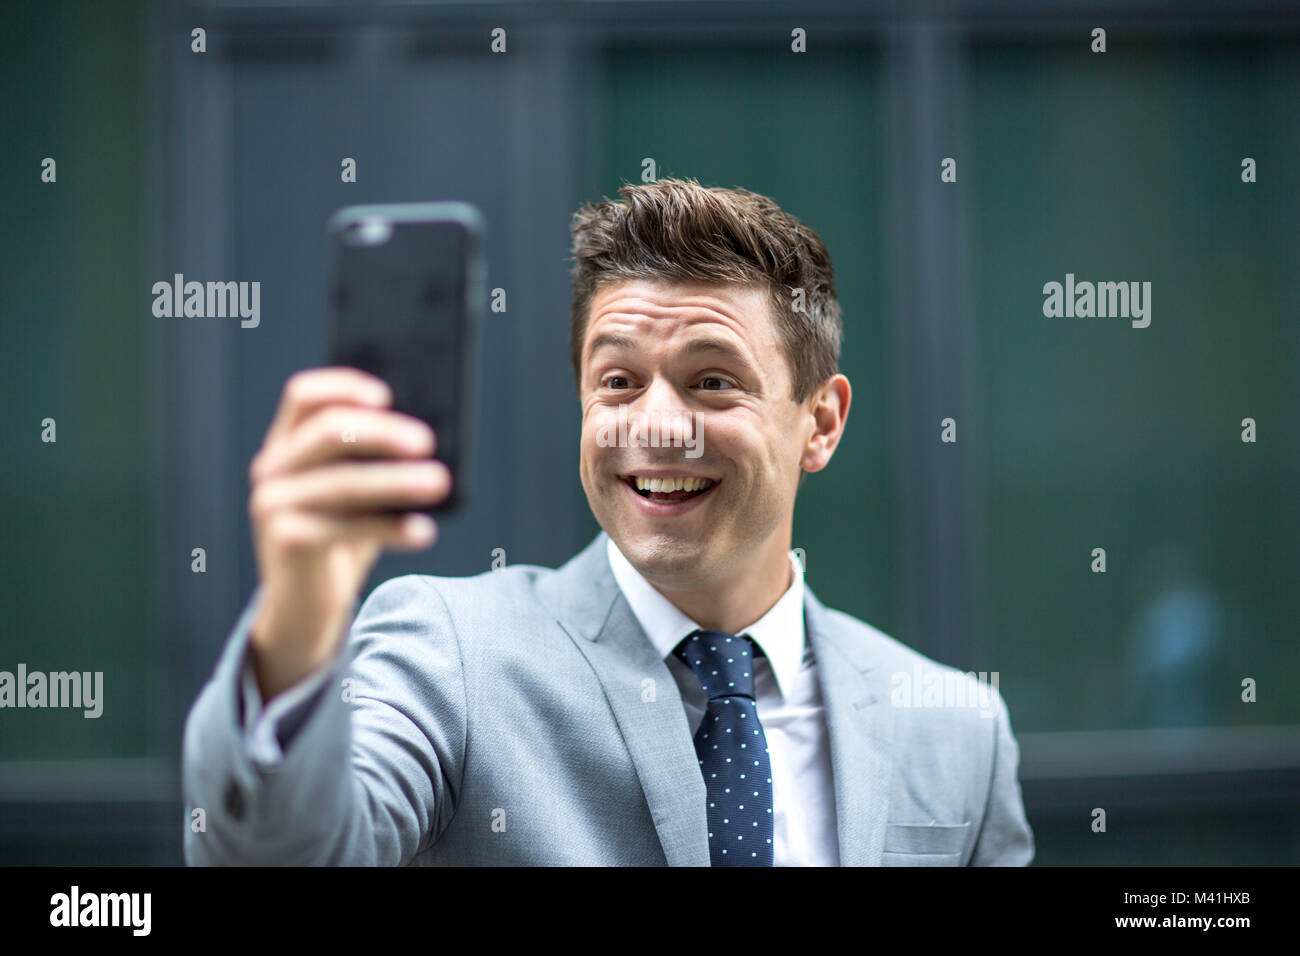 Smiling man on video call outdoors Stock Photo